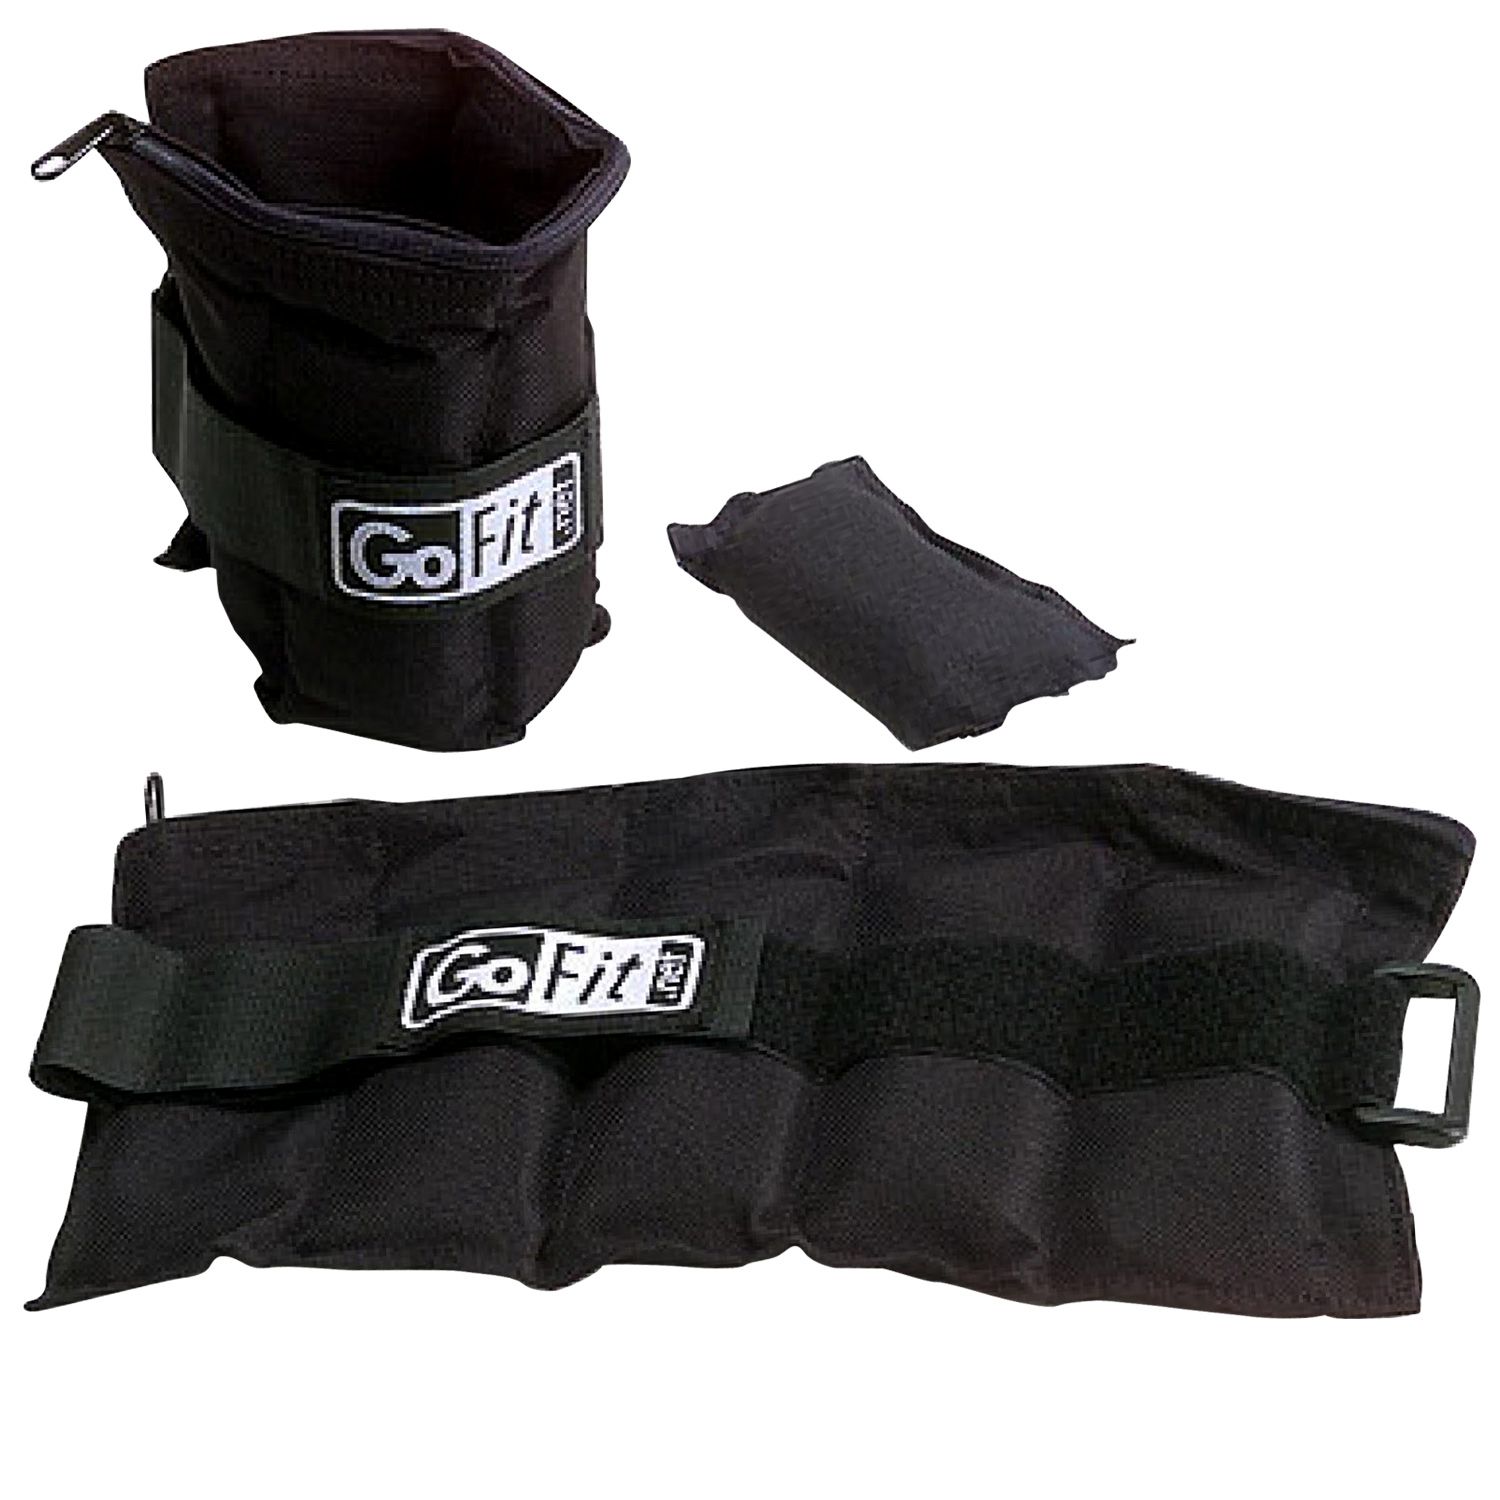 GoFit 5lb Adjustable Ankle Weights